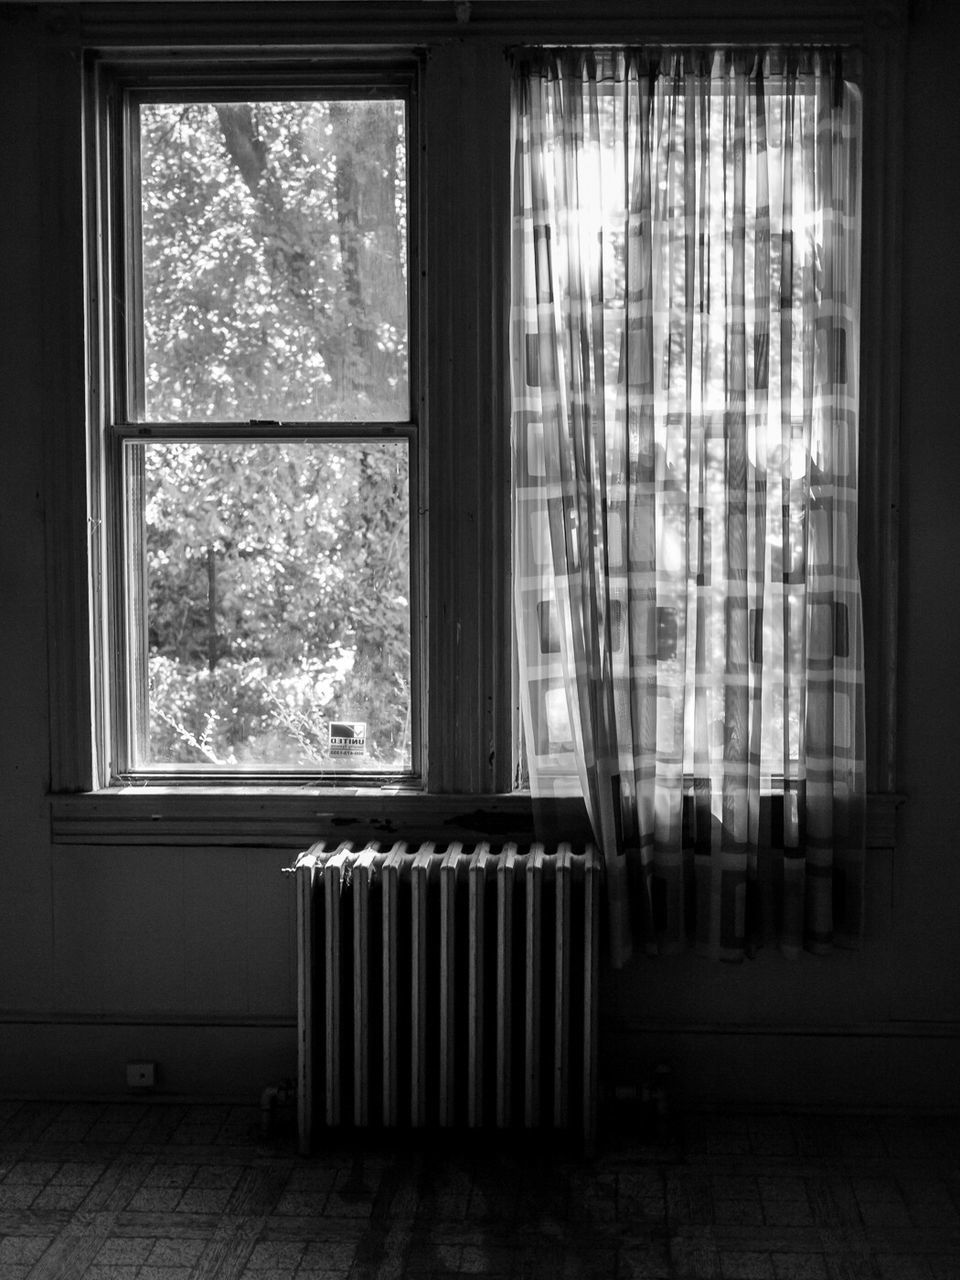 Radiator and curtains against windows